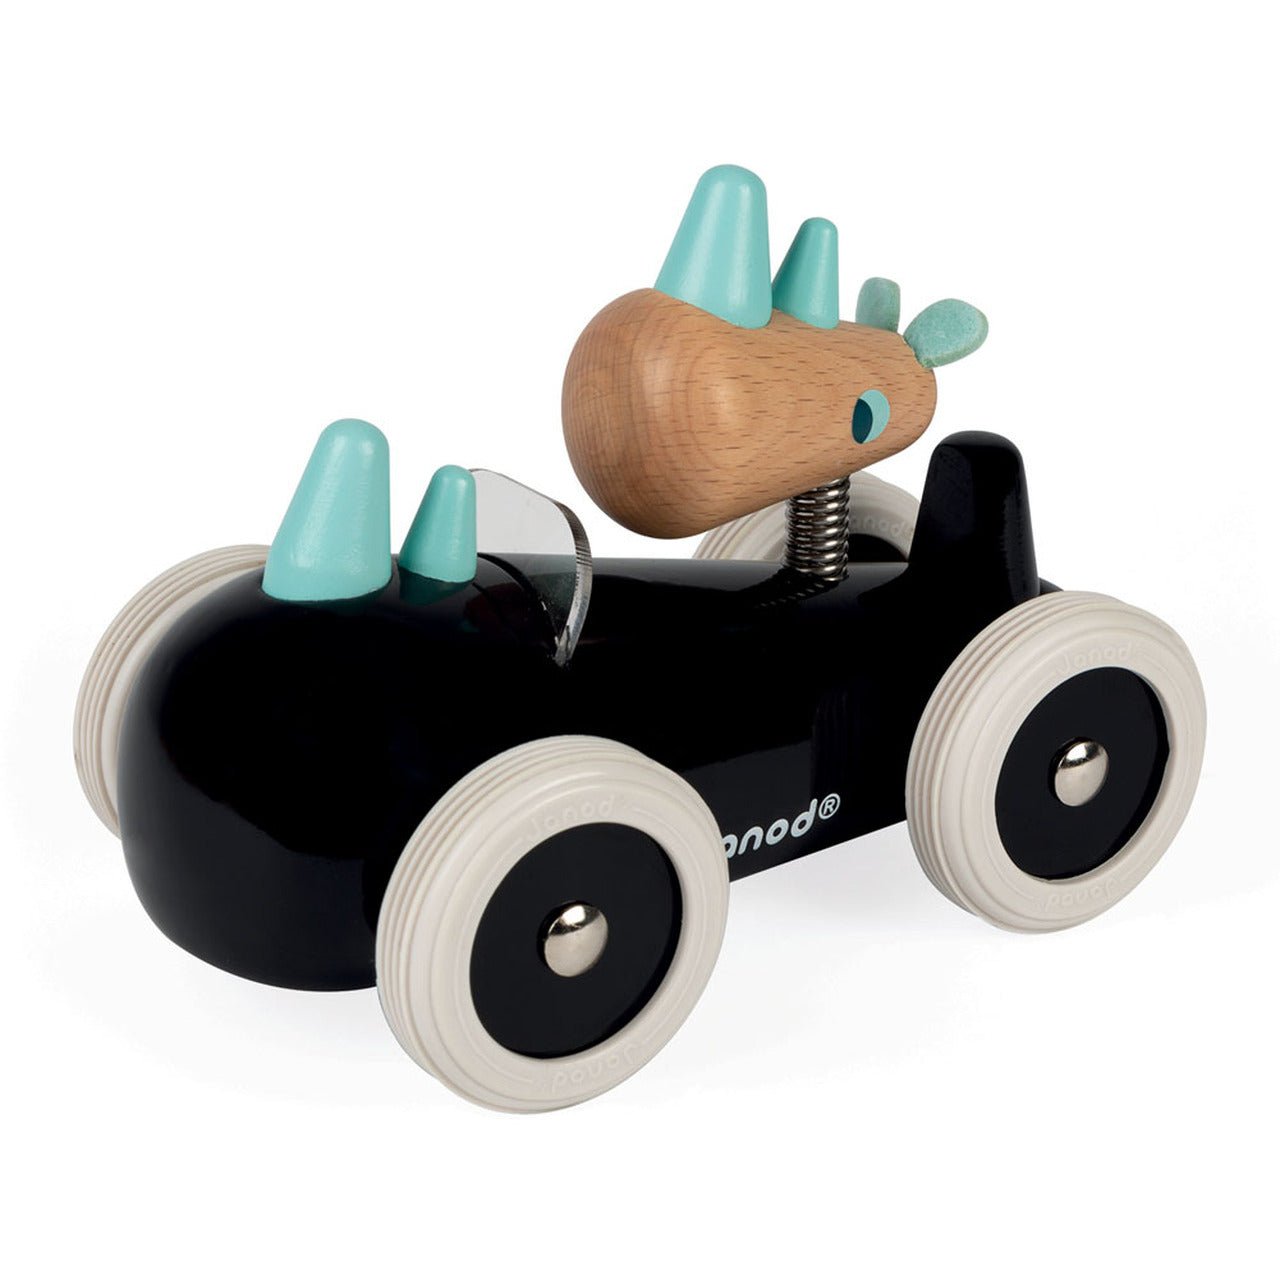 Janod Spirit Sidecar Philip Wooden Motorcycle Toy French Design